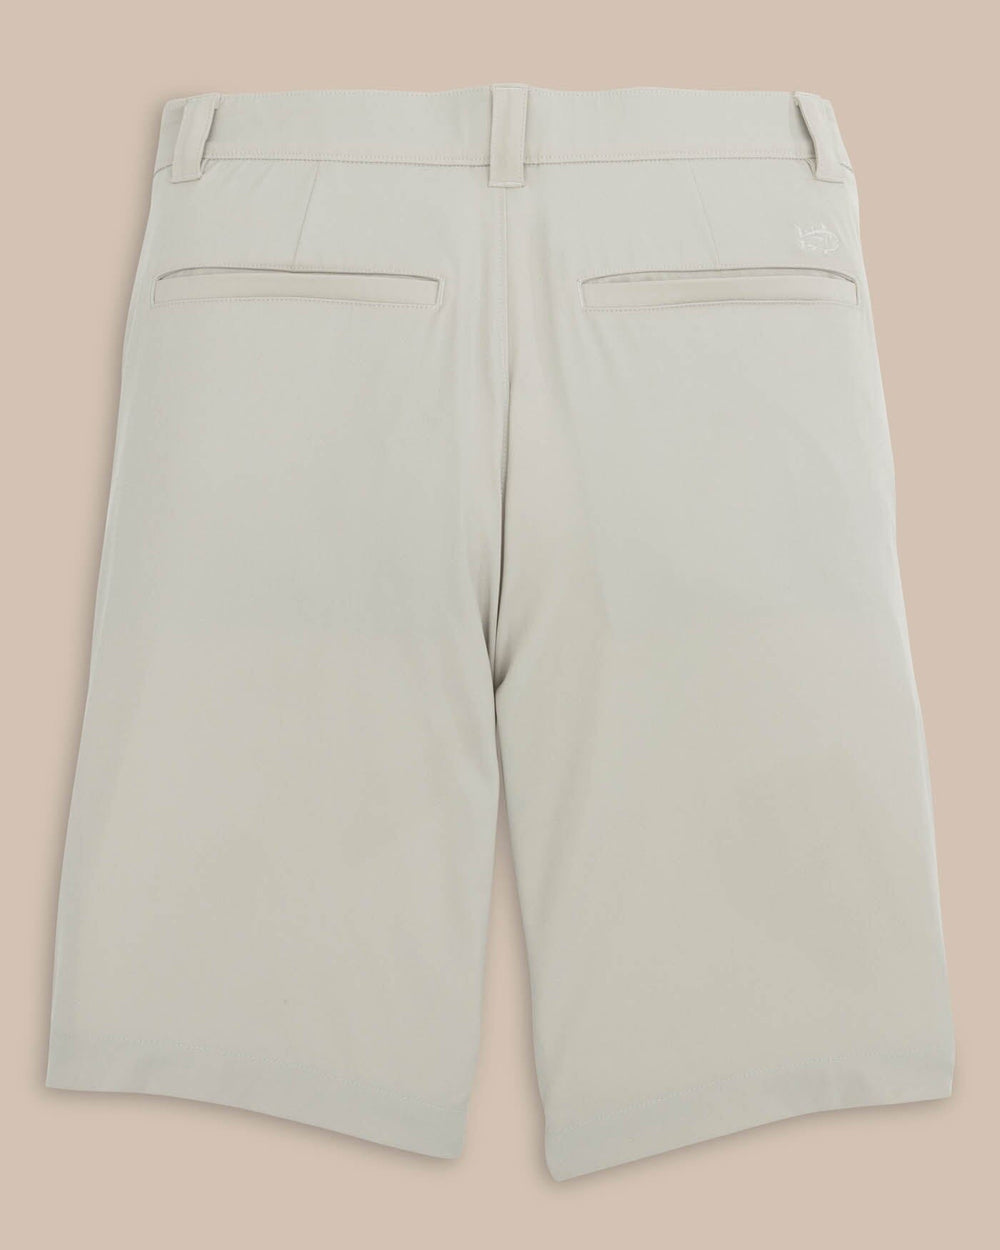 The back view of the Southern Tide brrr die 10 Short by Southern Tide - Stone